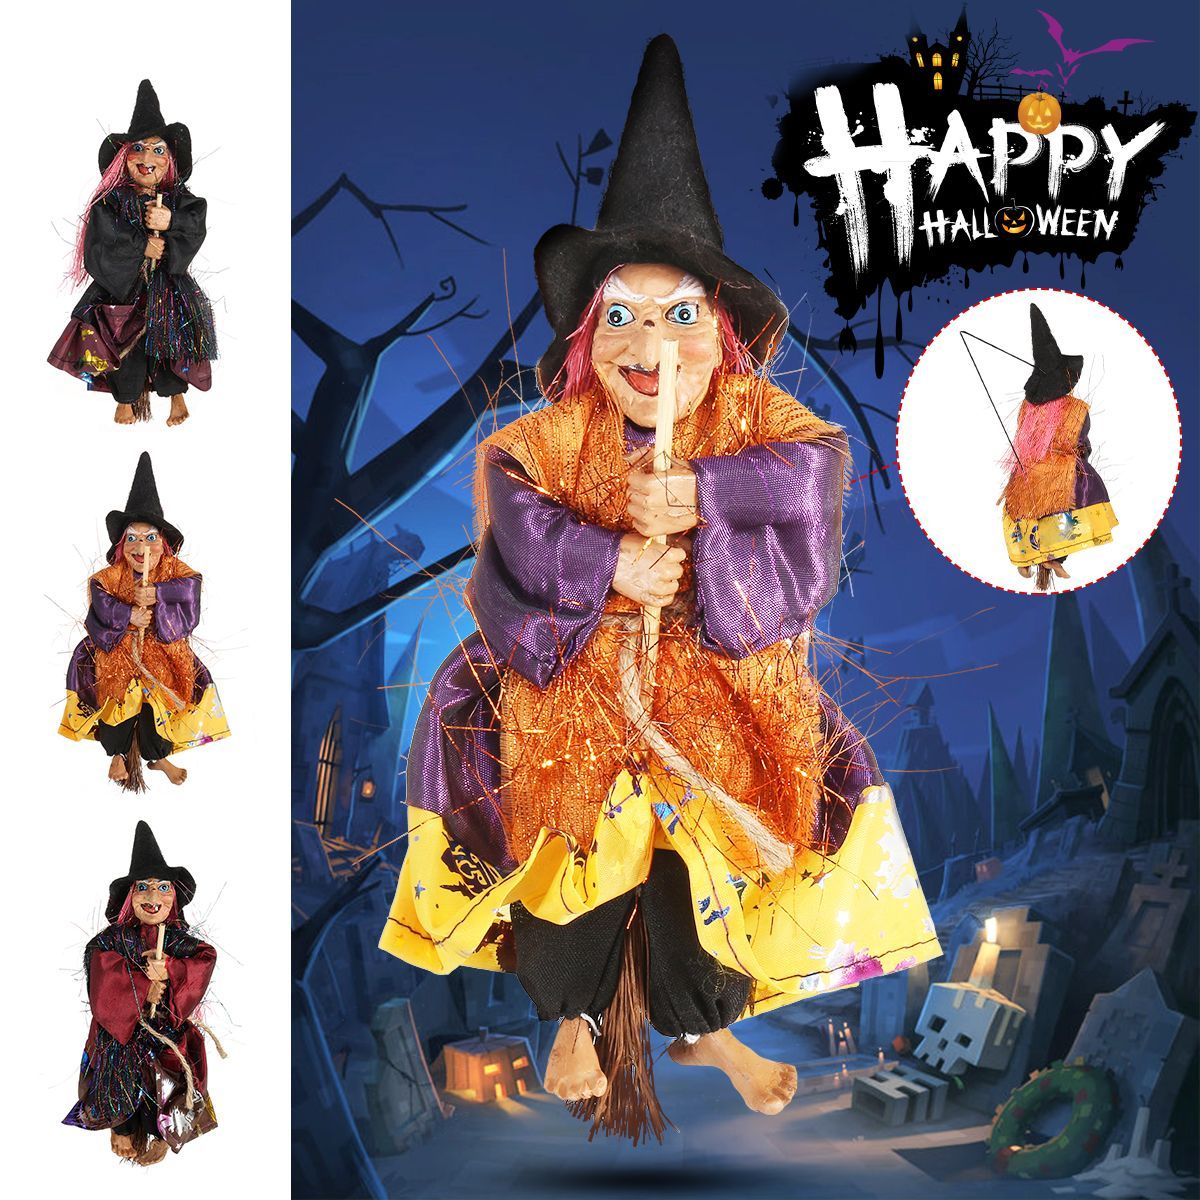 20CM-Halloween-Hanging-Animated-Talking-Witch-Props-Sound-Control-KTV-Bar-Decoration-1751653